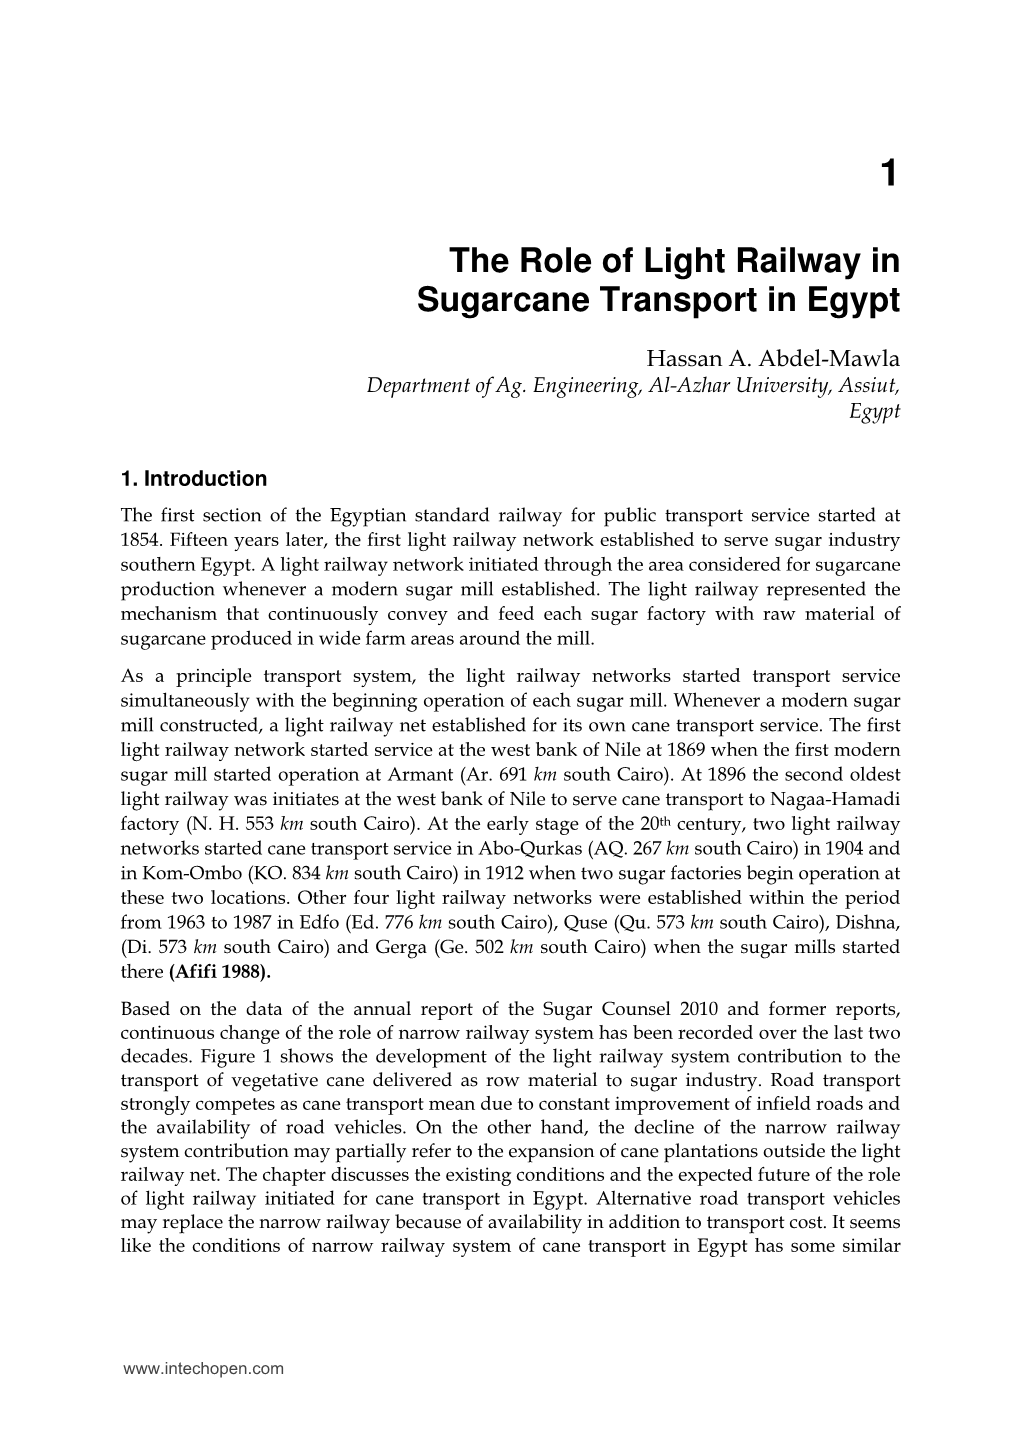 The Role of Light Railway in Sugarcane Transport in Egypt